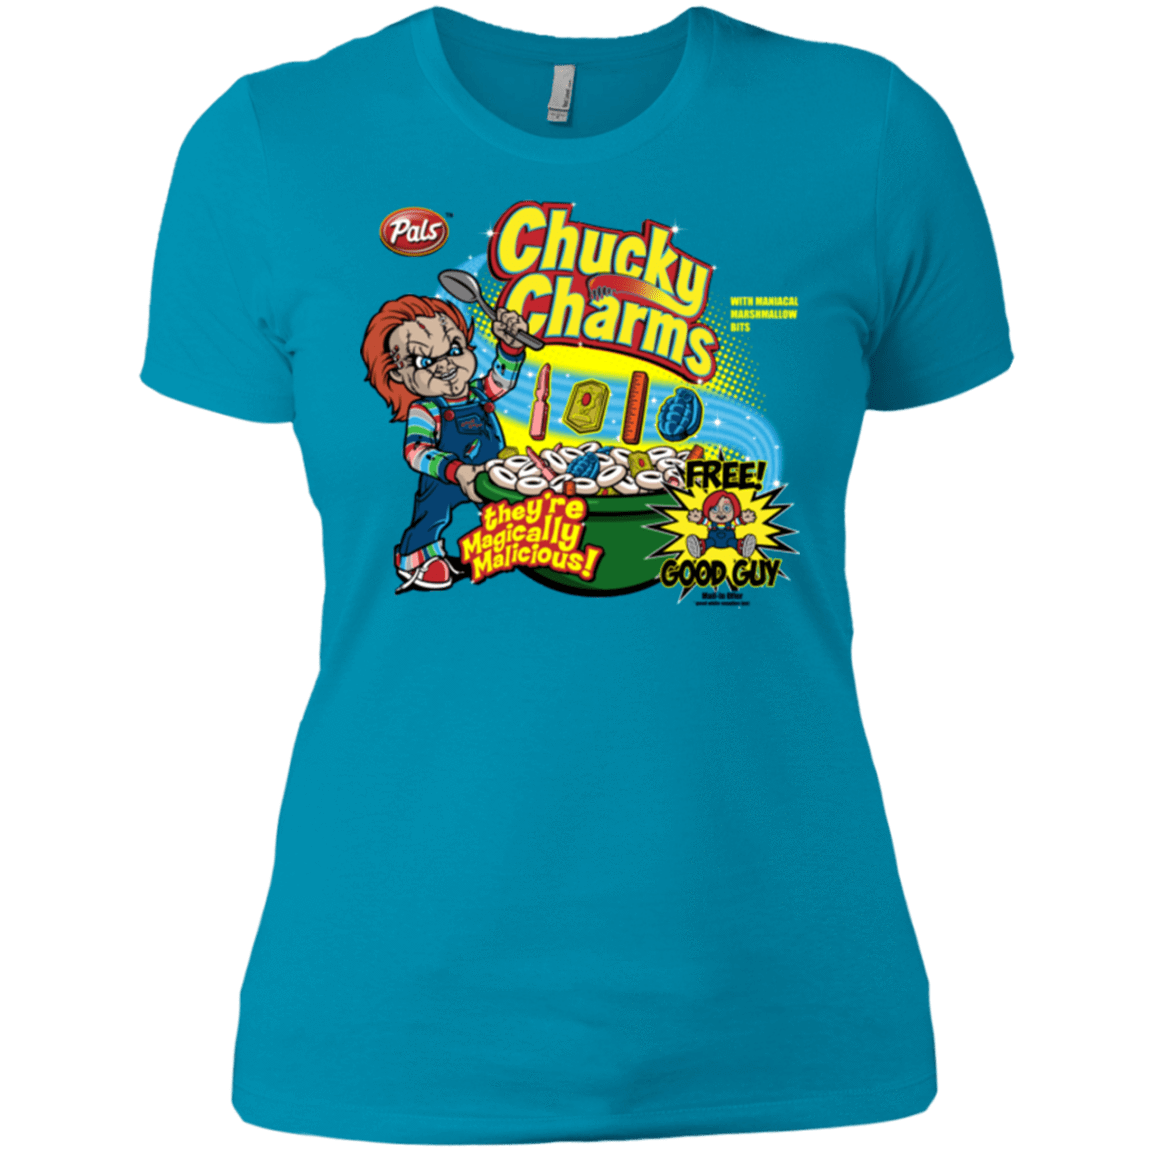 T-Shirts Turquoise / X-Small Chucky Charms Women's Premium T-Shirt